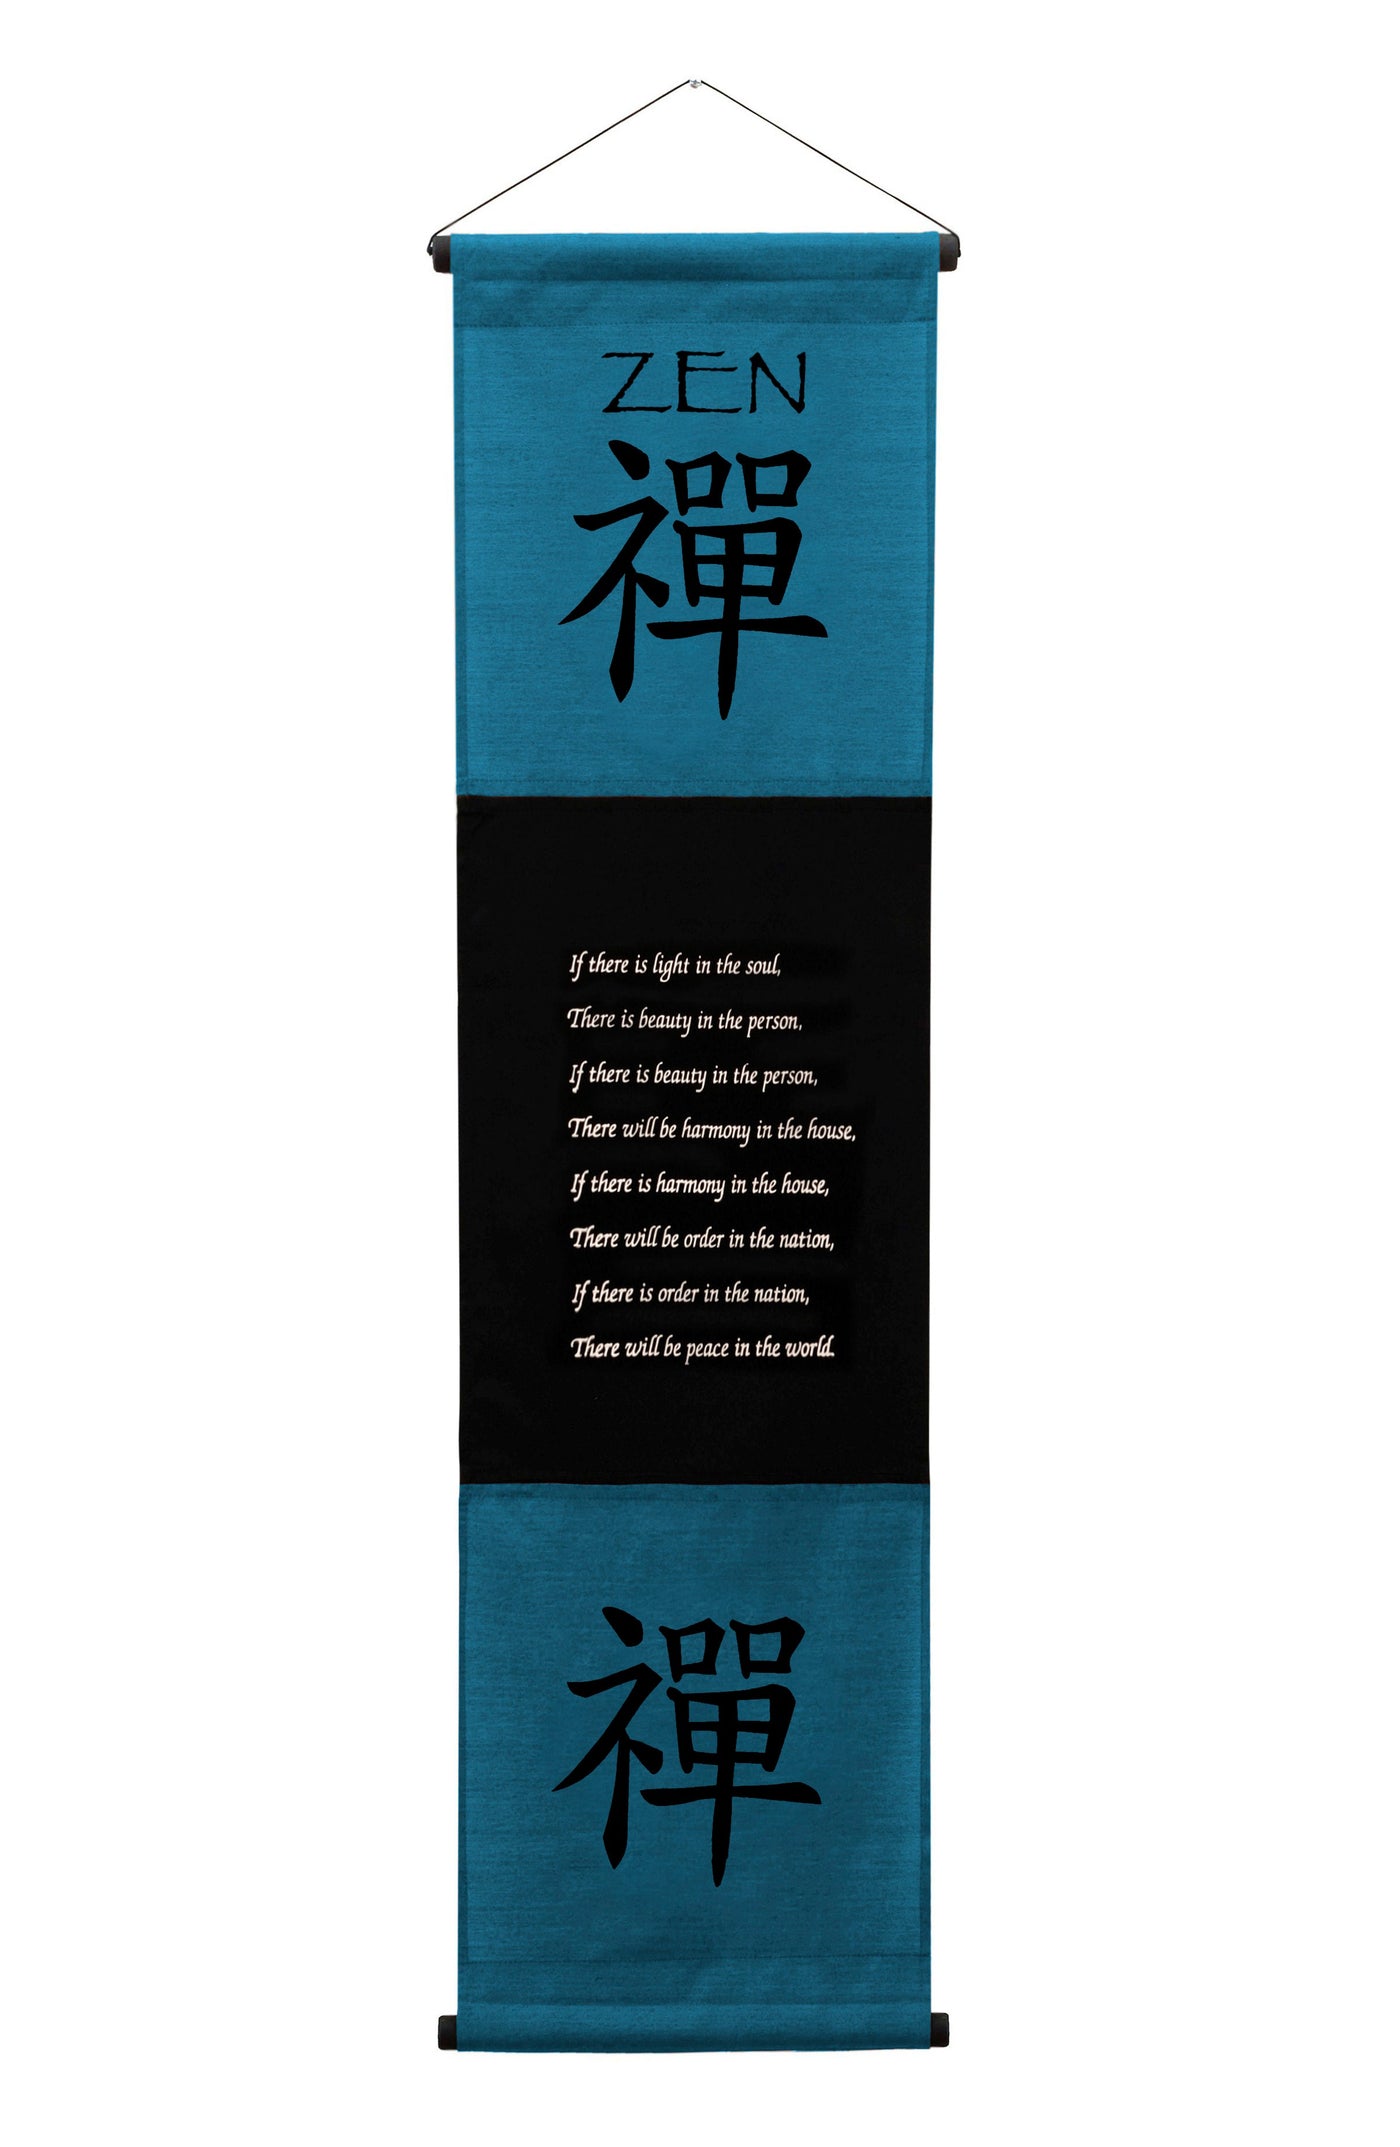 Inspirational Wall Decor "Zen" Banner Large, Inspiring Quote Hanging Scroll, Affirmation Motivational Uplifting Message Art, Thought Saying Tapestry